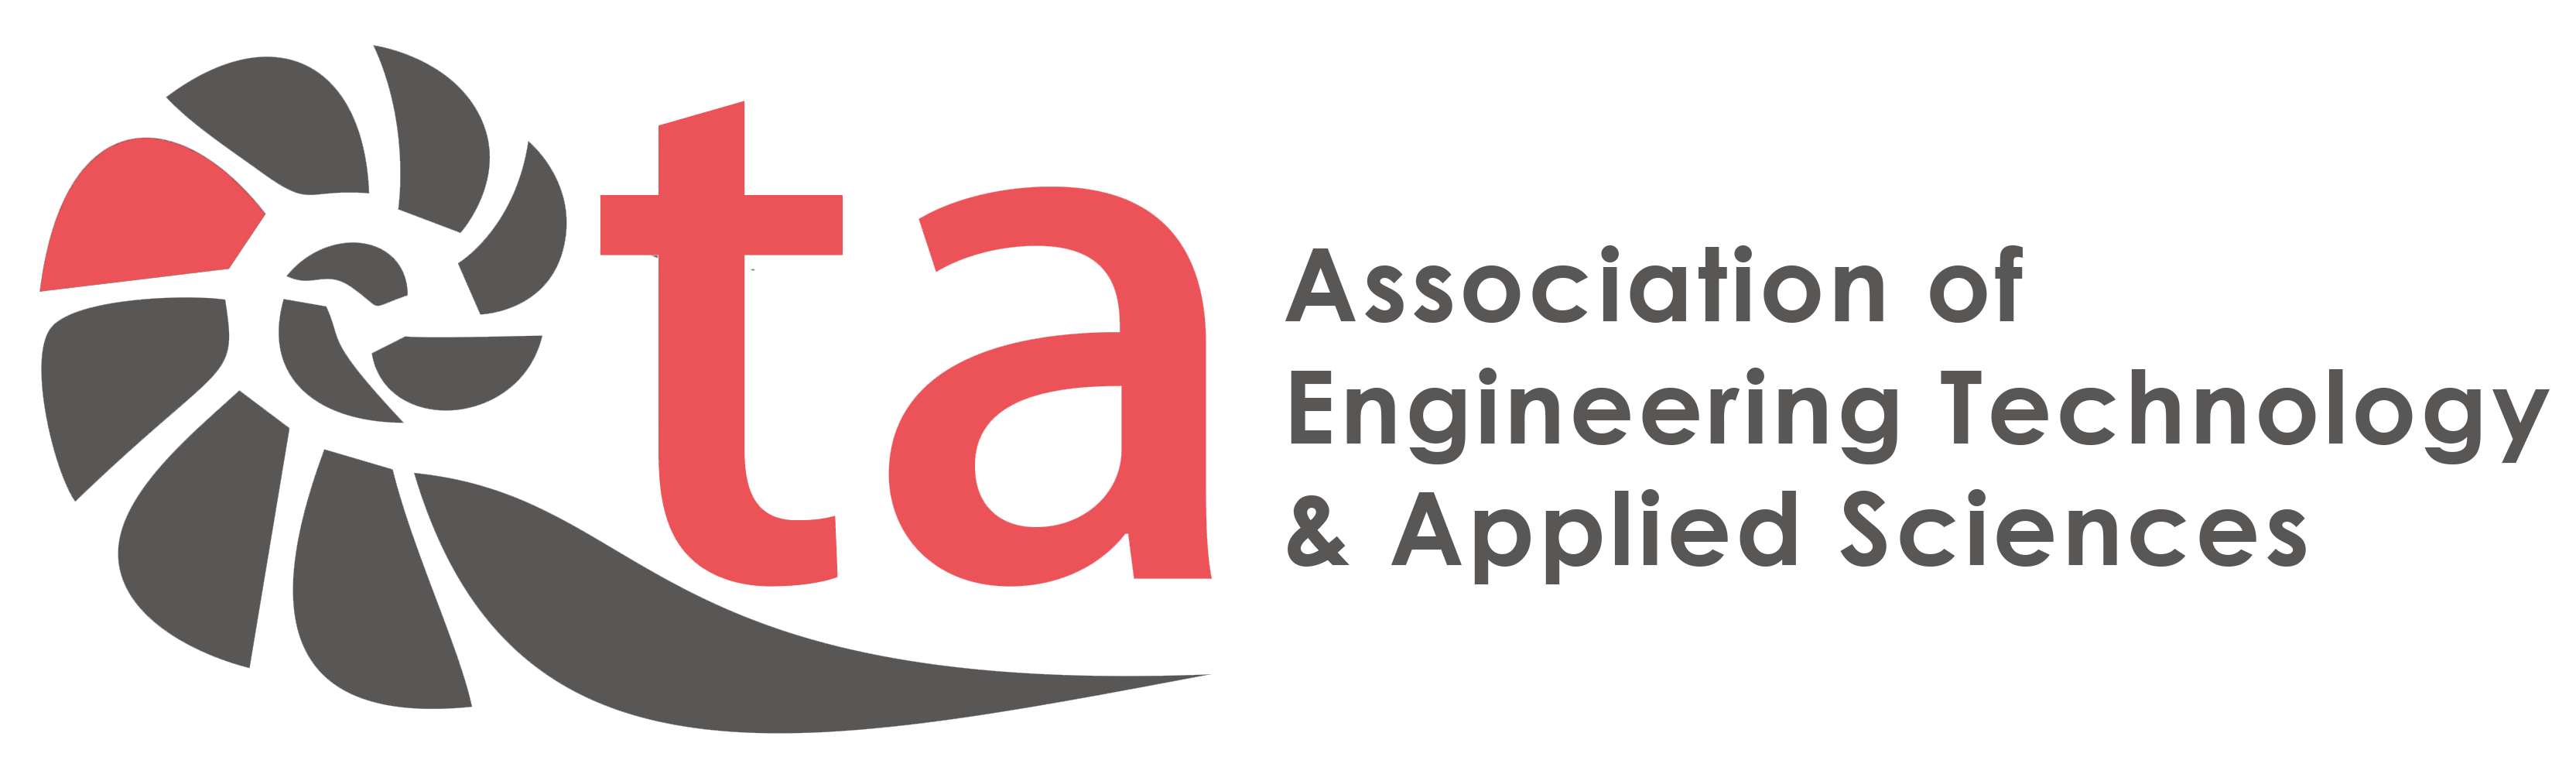 AETA International Conference on Future Trends in Engineering, Robotics and Drones, Information Technology & Applied Sciences  (ERIA)